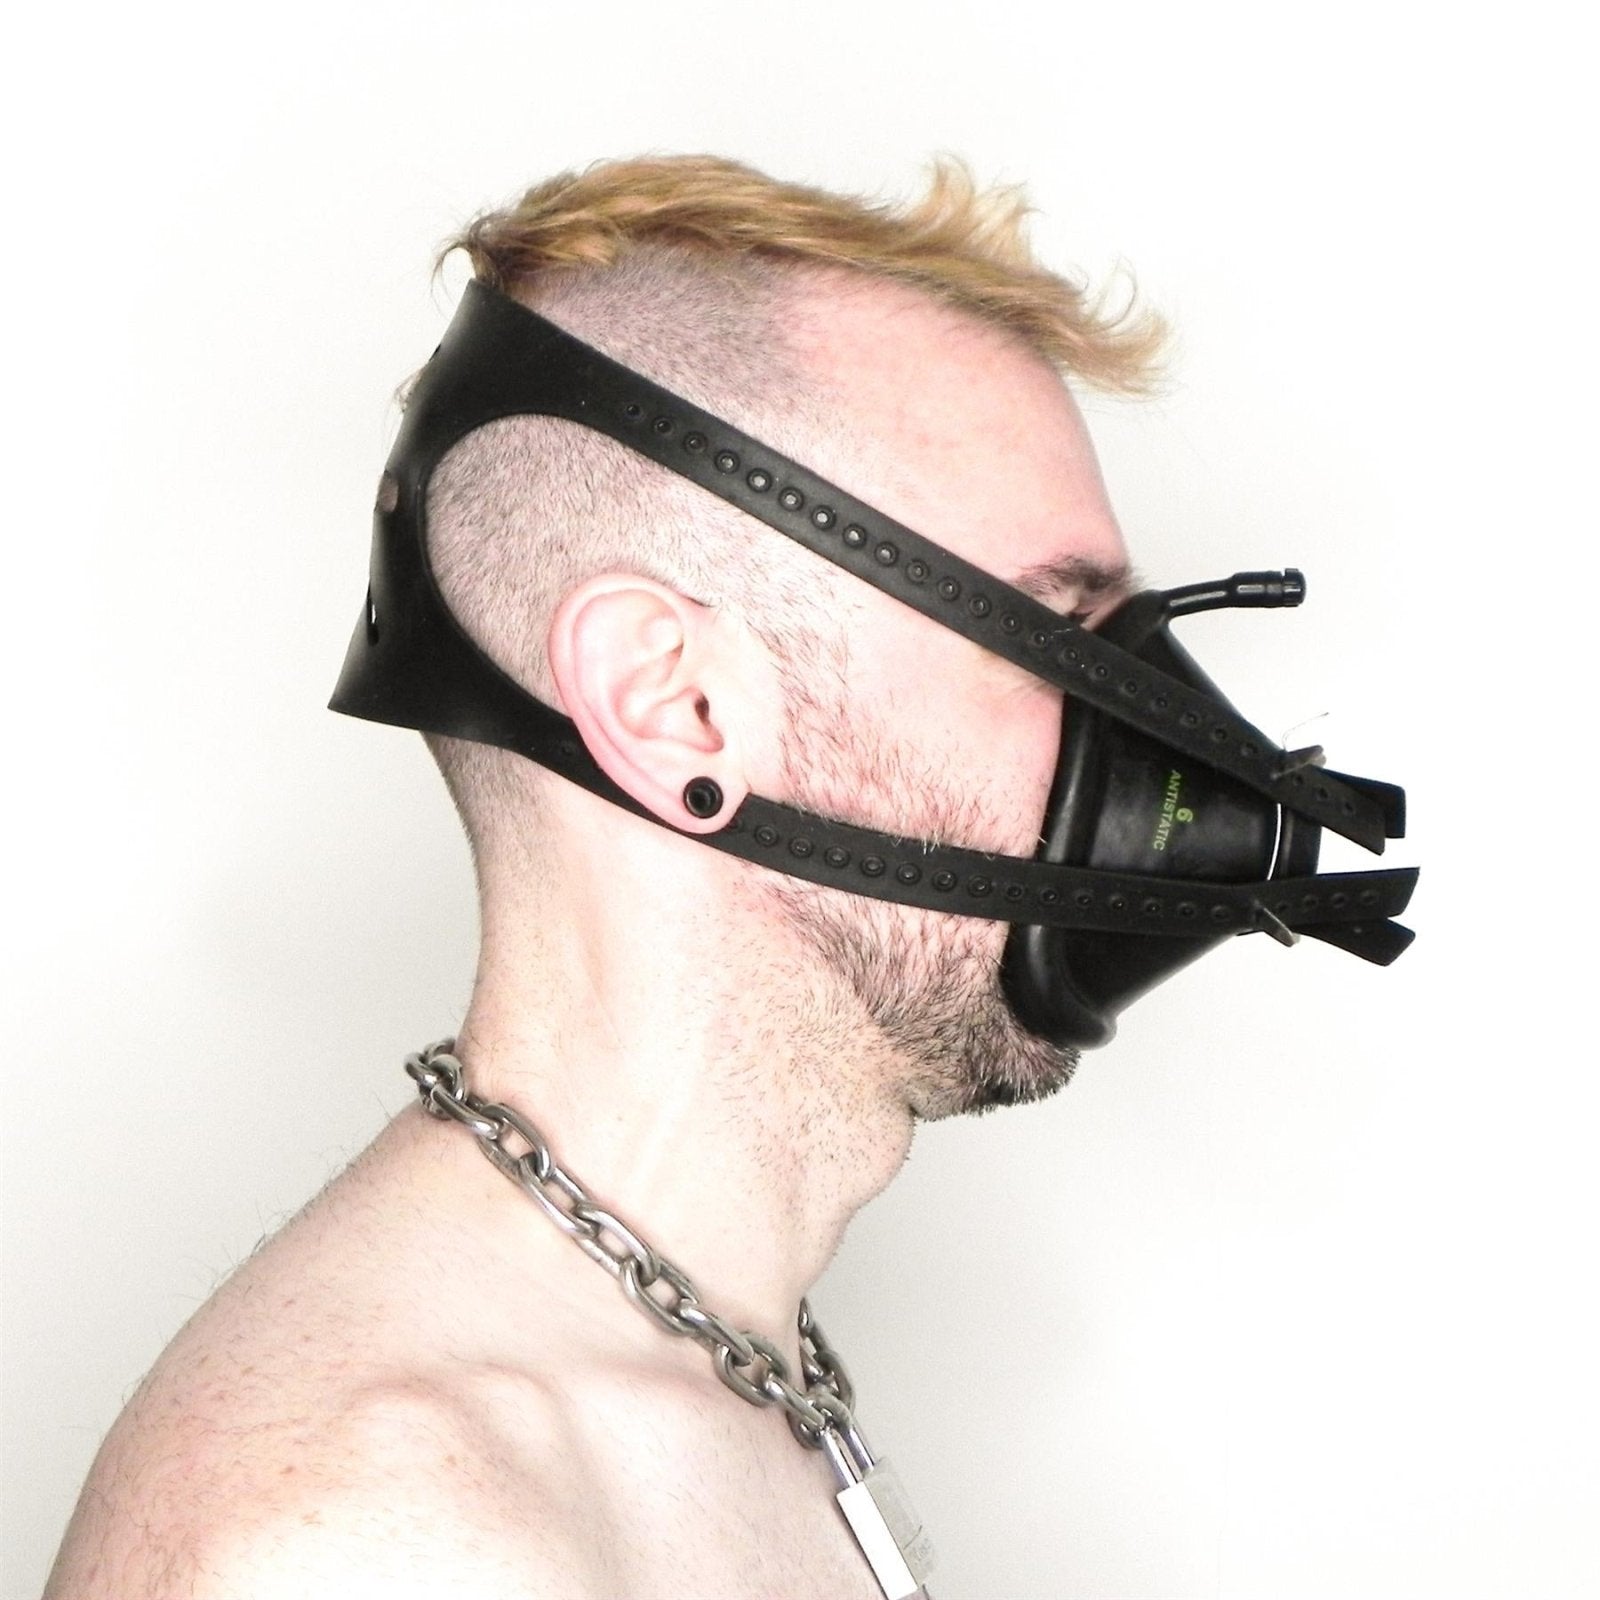 Rubber Anaesthesia Face Mask & Head Harness, Black from ASCO.